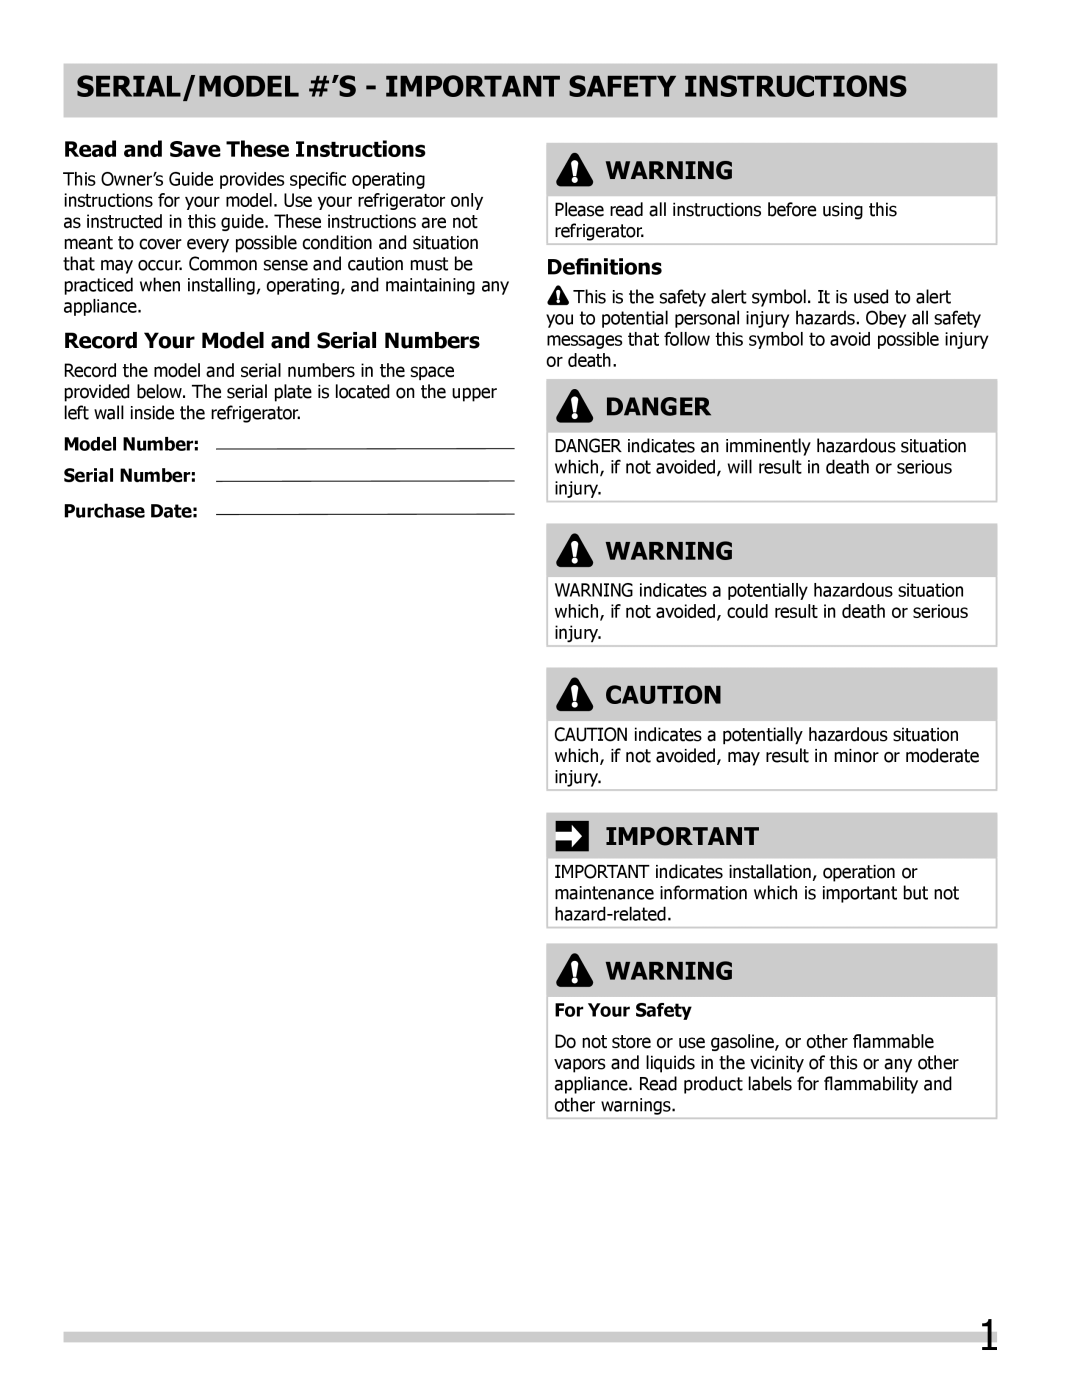 Keystone KSTRC312AW Serial/Model #’S - Important Safety Instructions, Danger, Read and Save These Instructions, Deﬁnitions 